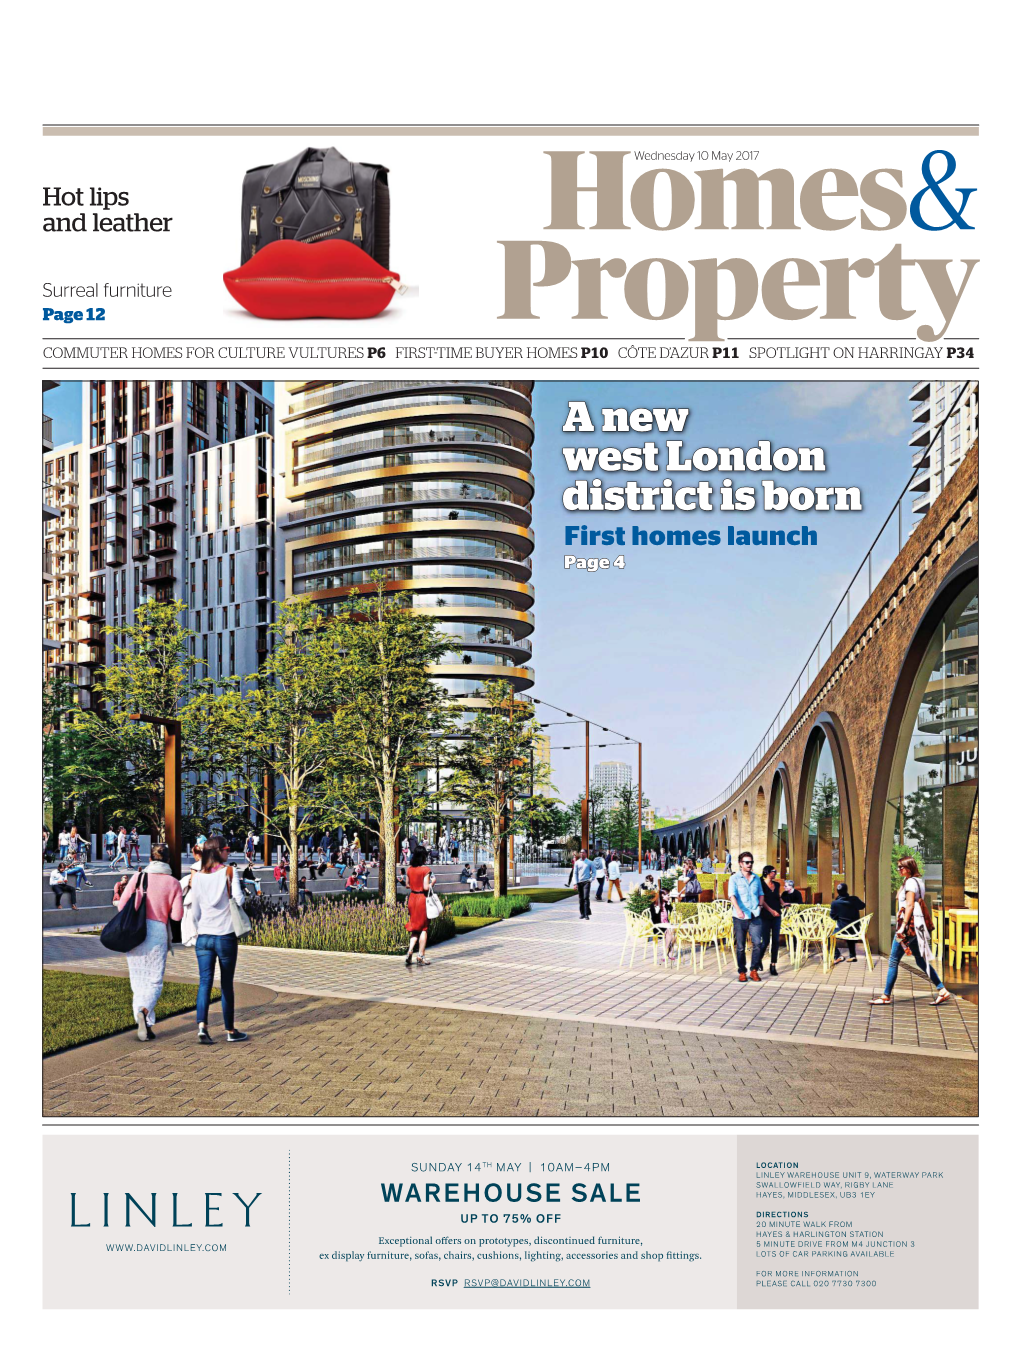 A New West London District Is Born First Homes Launch Page 4 2 WEDNESDAY 10 MAY 2017 EVENING STANDARD Homes & Property | News